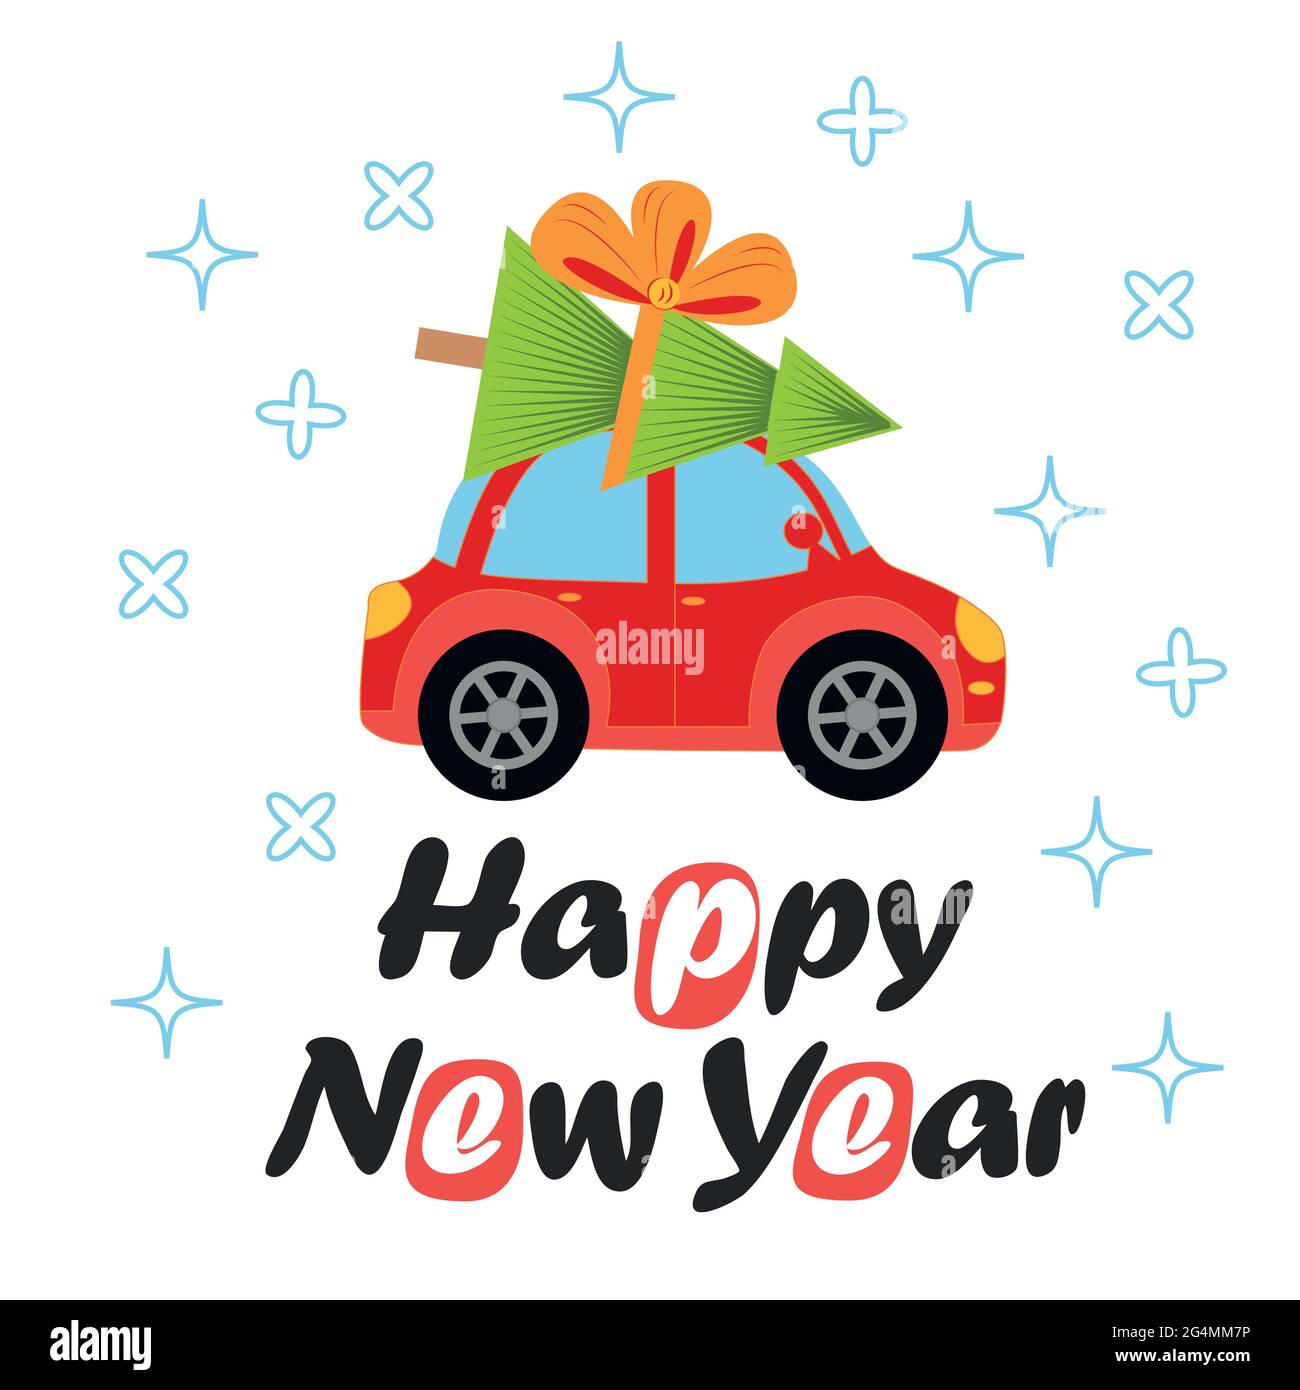 Greeting card with red retro car with christmas tree on the roof. Merry christmas and happy new year illustrations. Happy New Year lettering Stock Vector